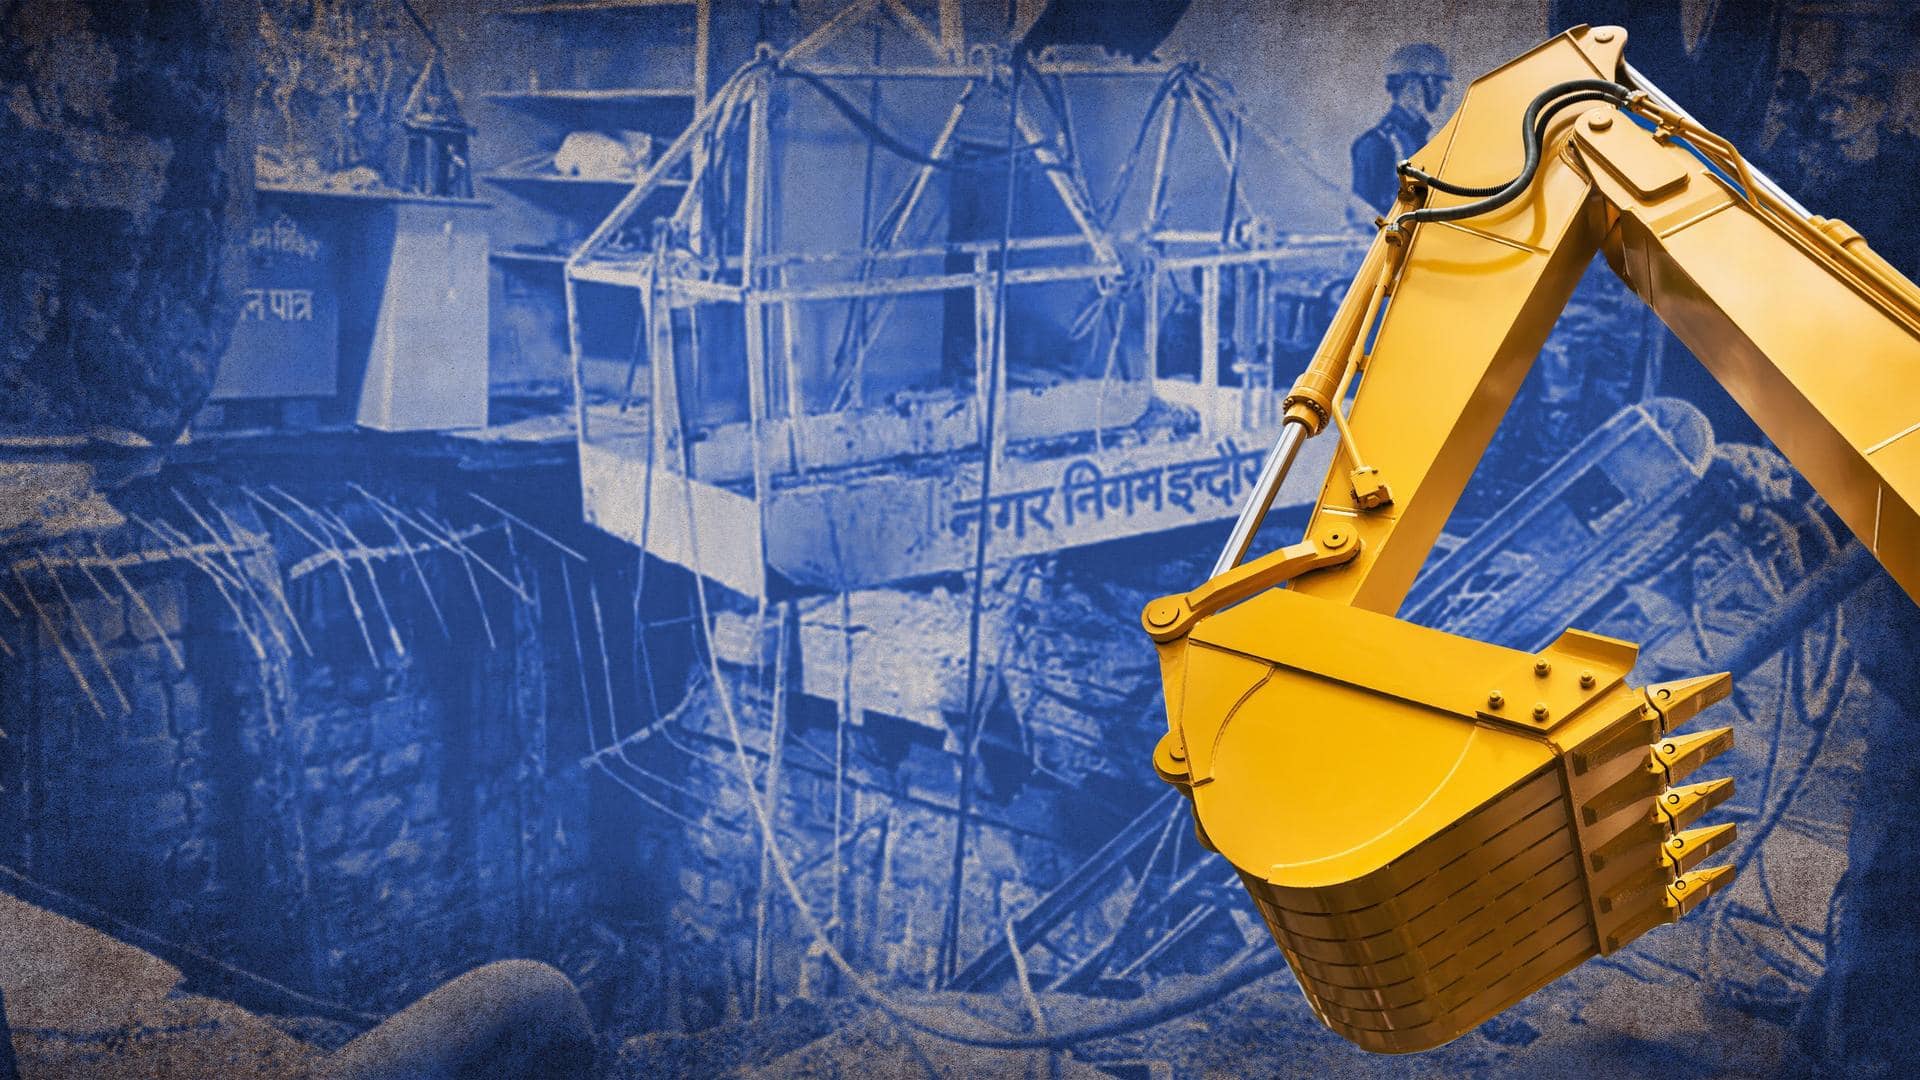 Indore temple tragedy: Bulldozers demolish illegal construction days after mishap